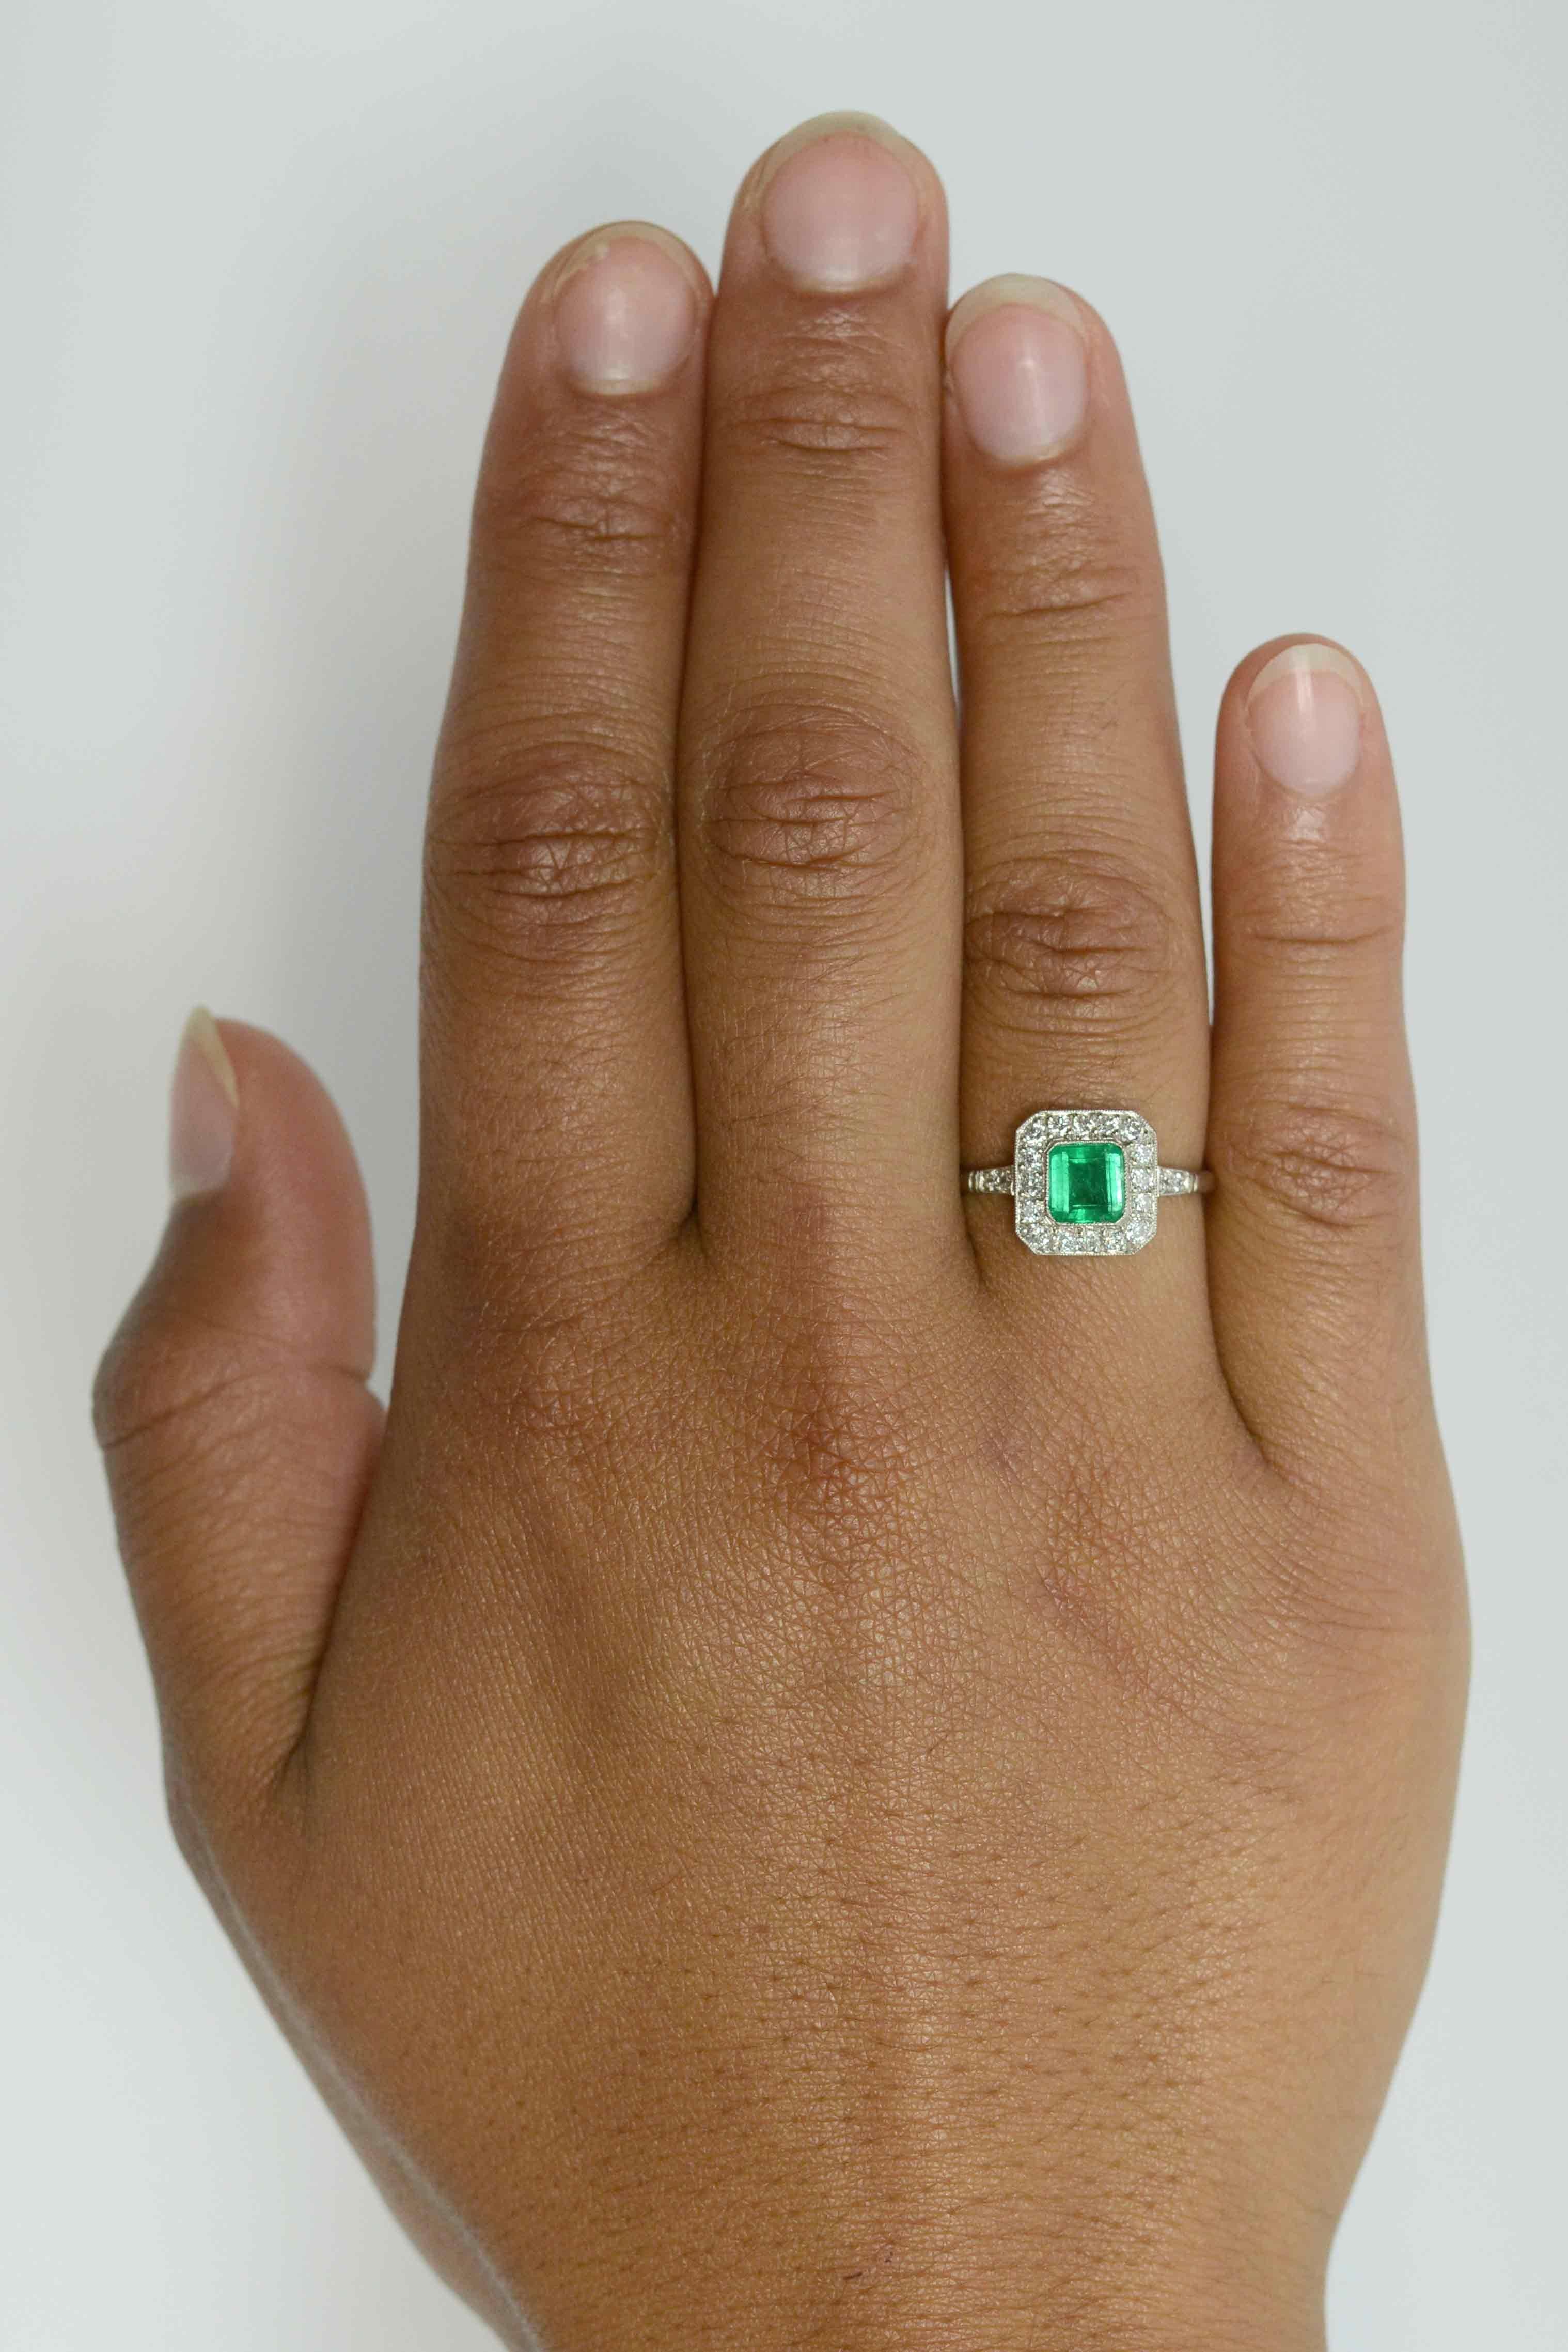 A breathtaking grass-green Colombian emerald takes center stage in this striking Art Deco Style engagement ring. The platinum setting features a 3/4 carat gemstone that glows with a light from within its soul. Floating in a bezel setting and